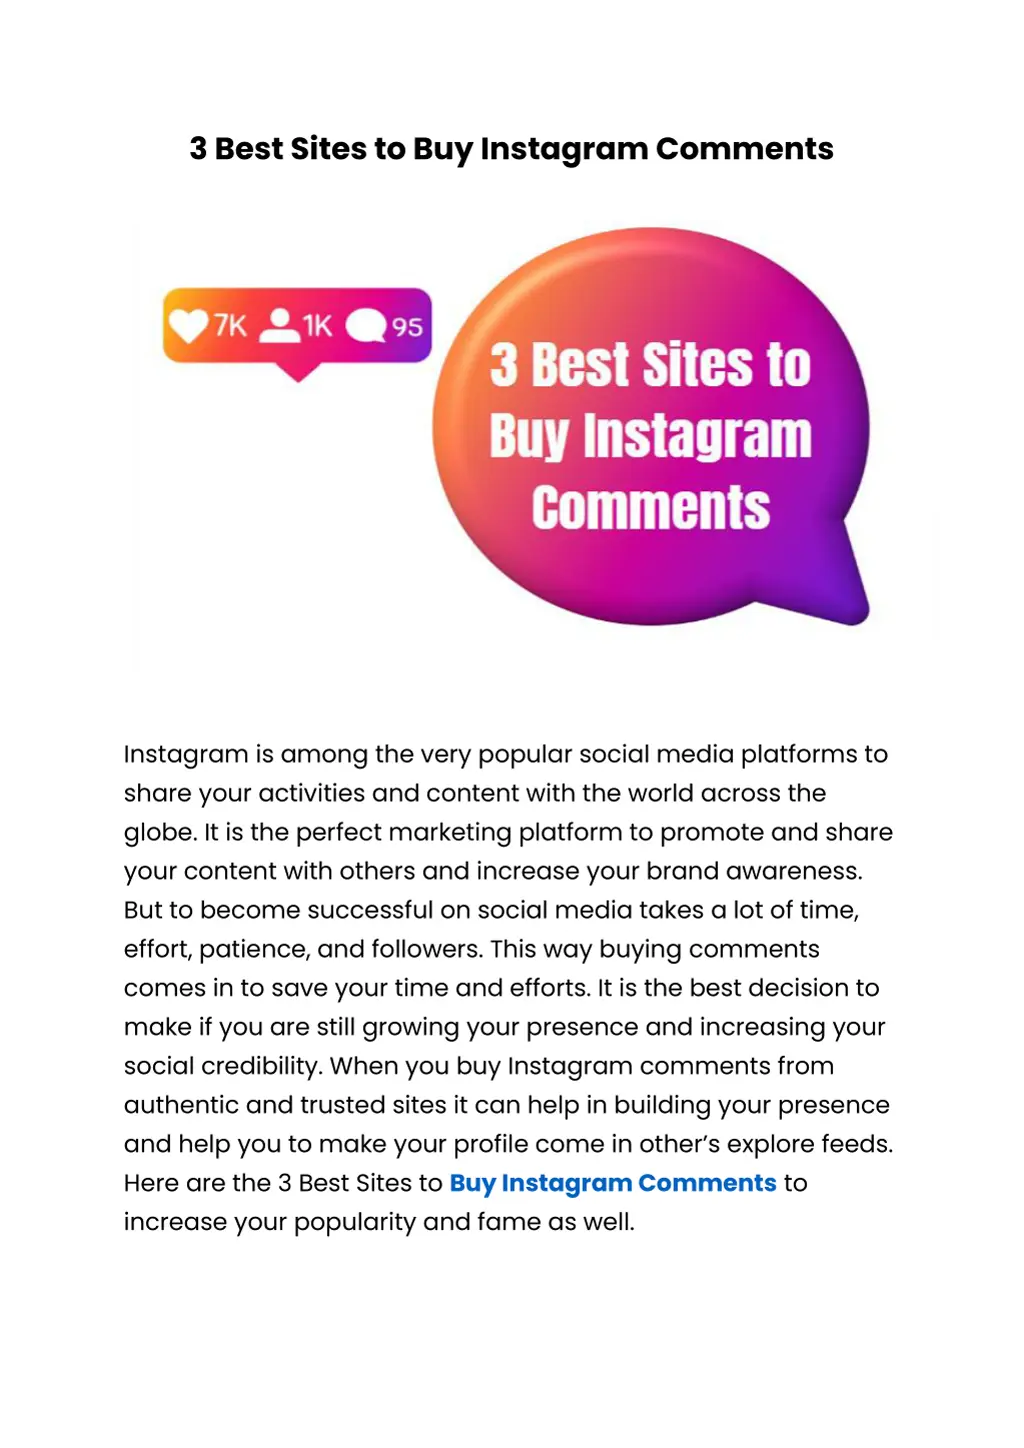 3 best sites to buy instagram comments n.